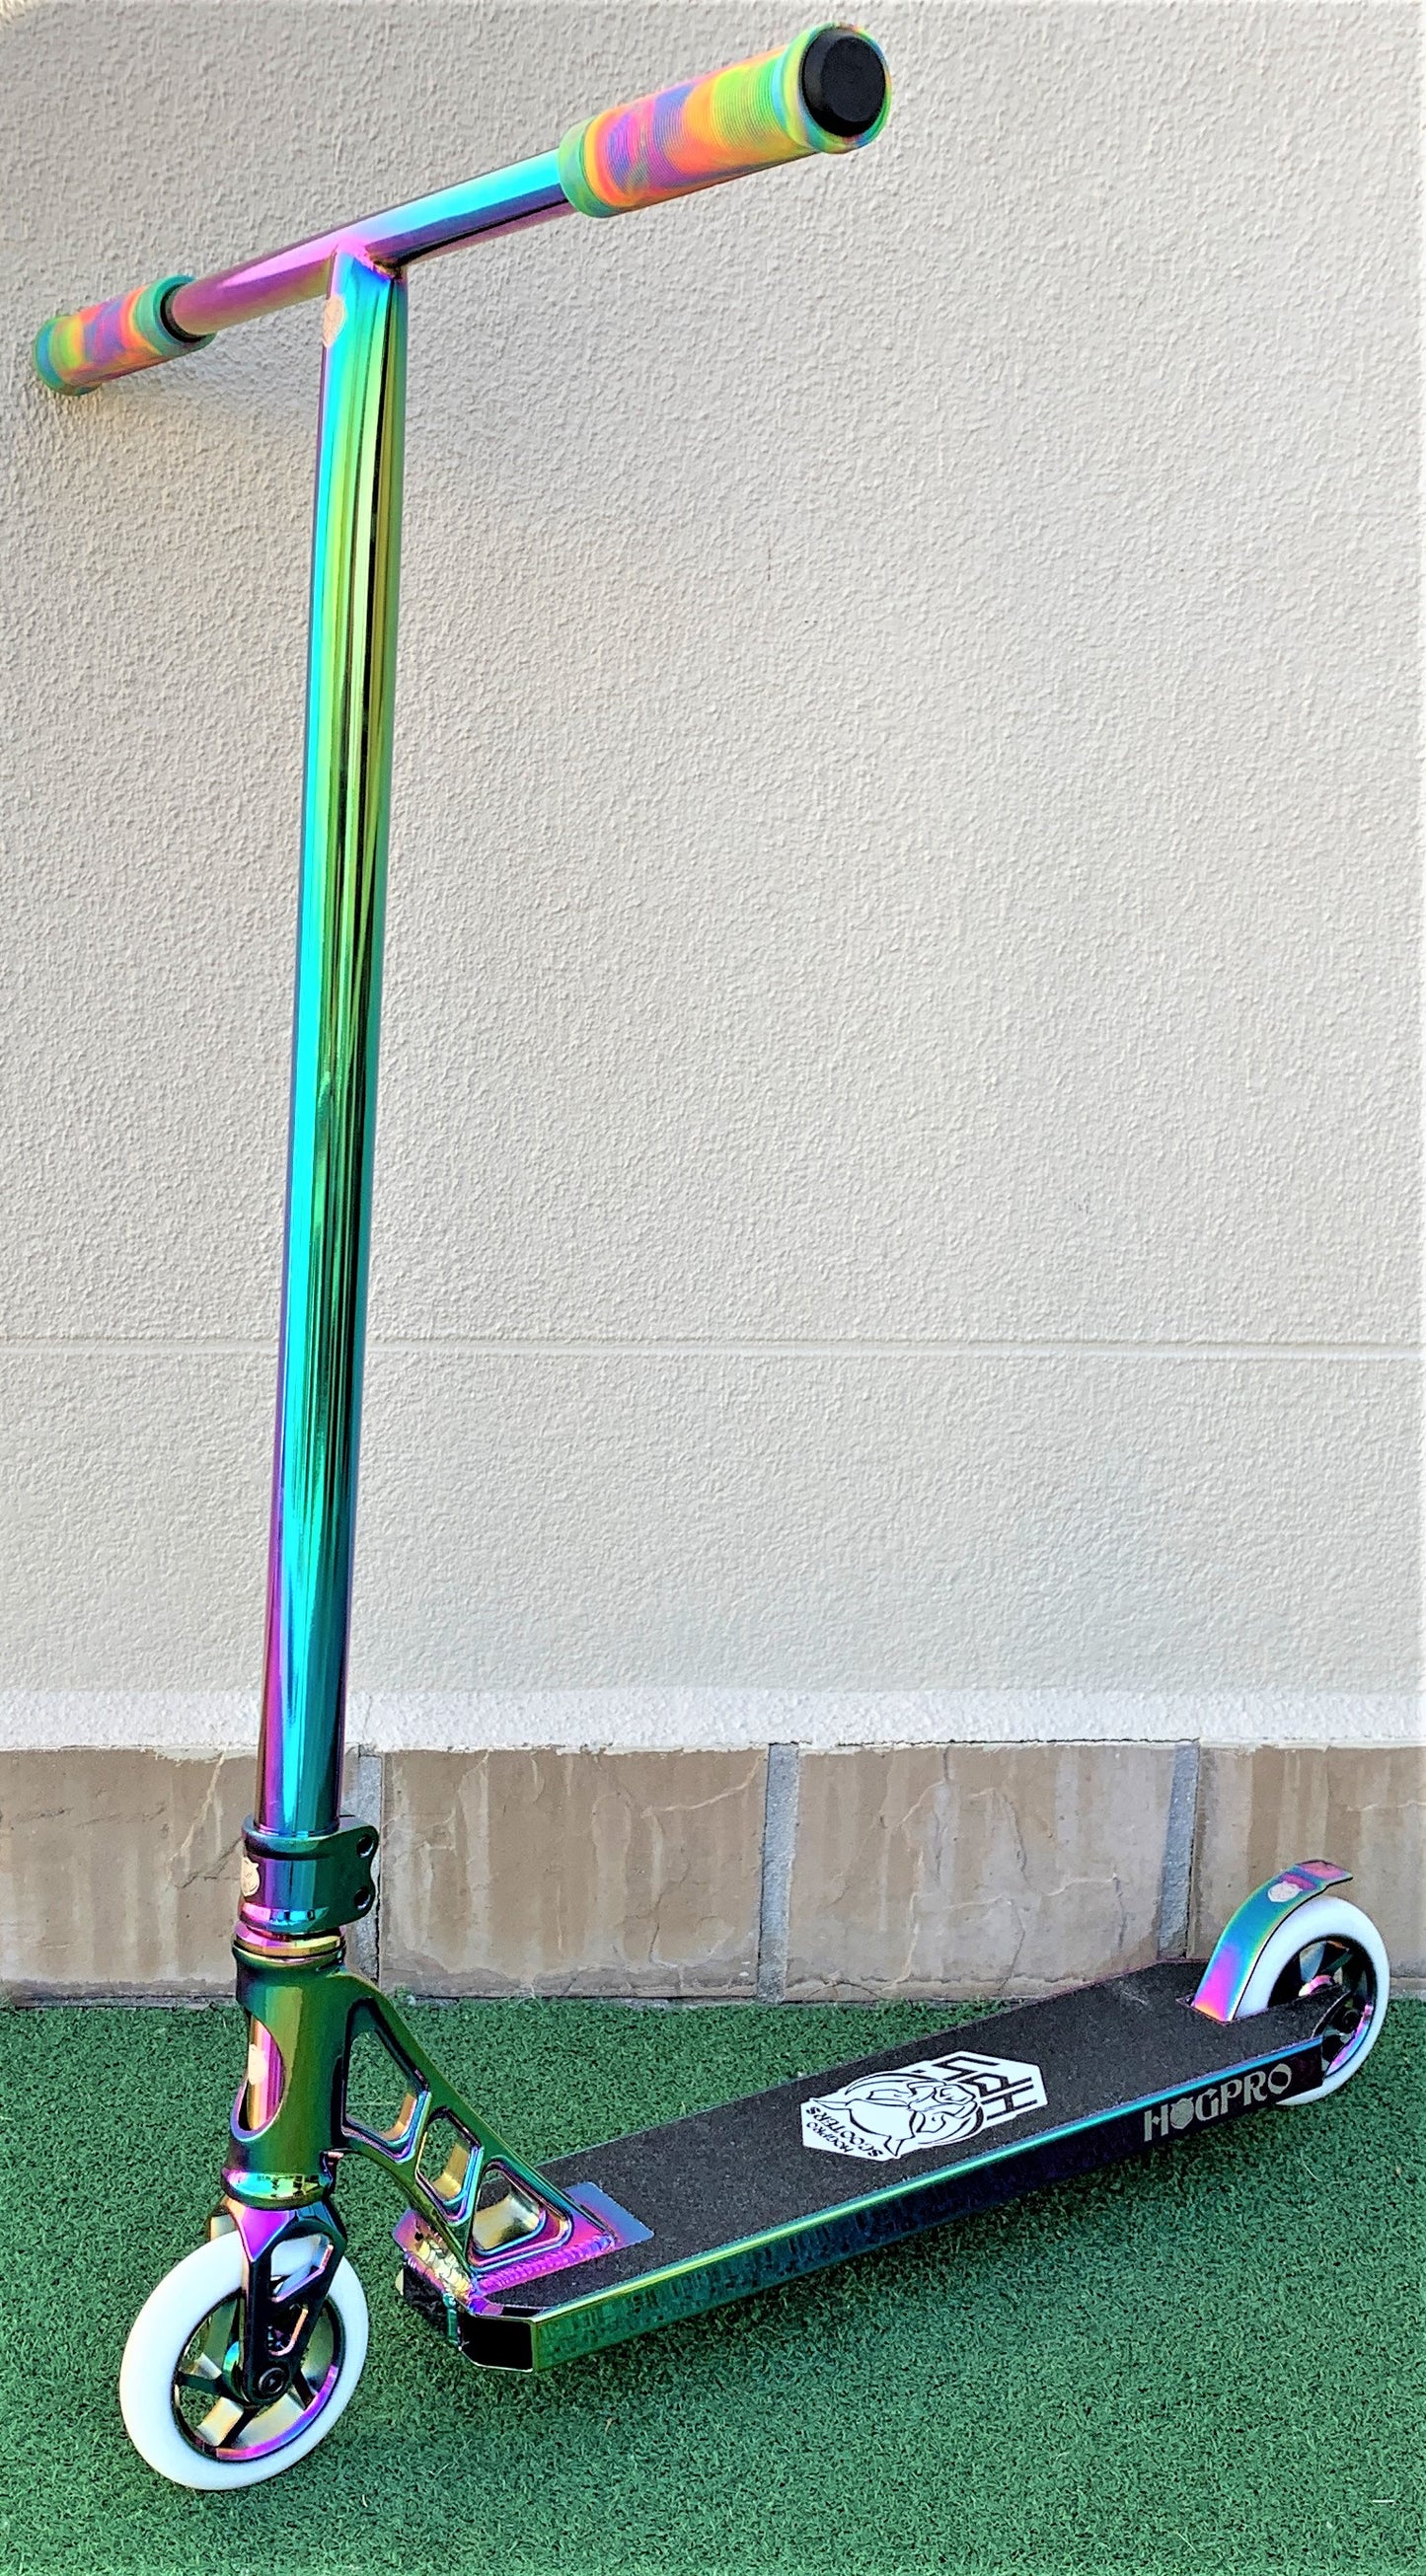 HogPro SP1 stunt scooter, Neo T-bar, Neo forged deck with 110mm neo core wheels (Rainbow Grips)